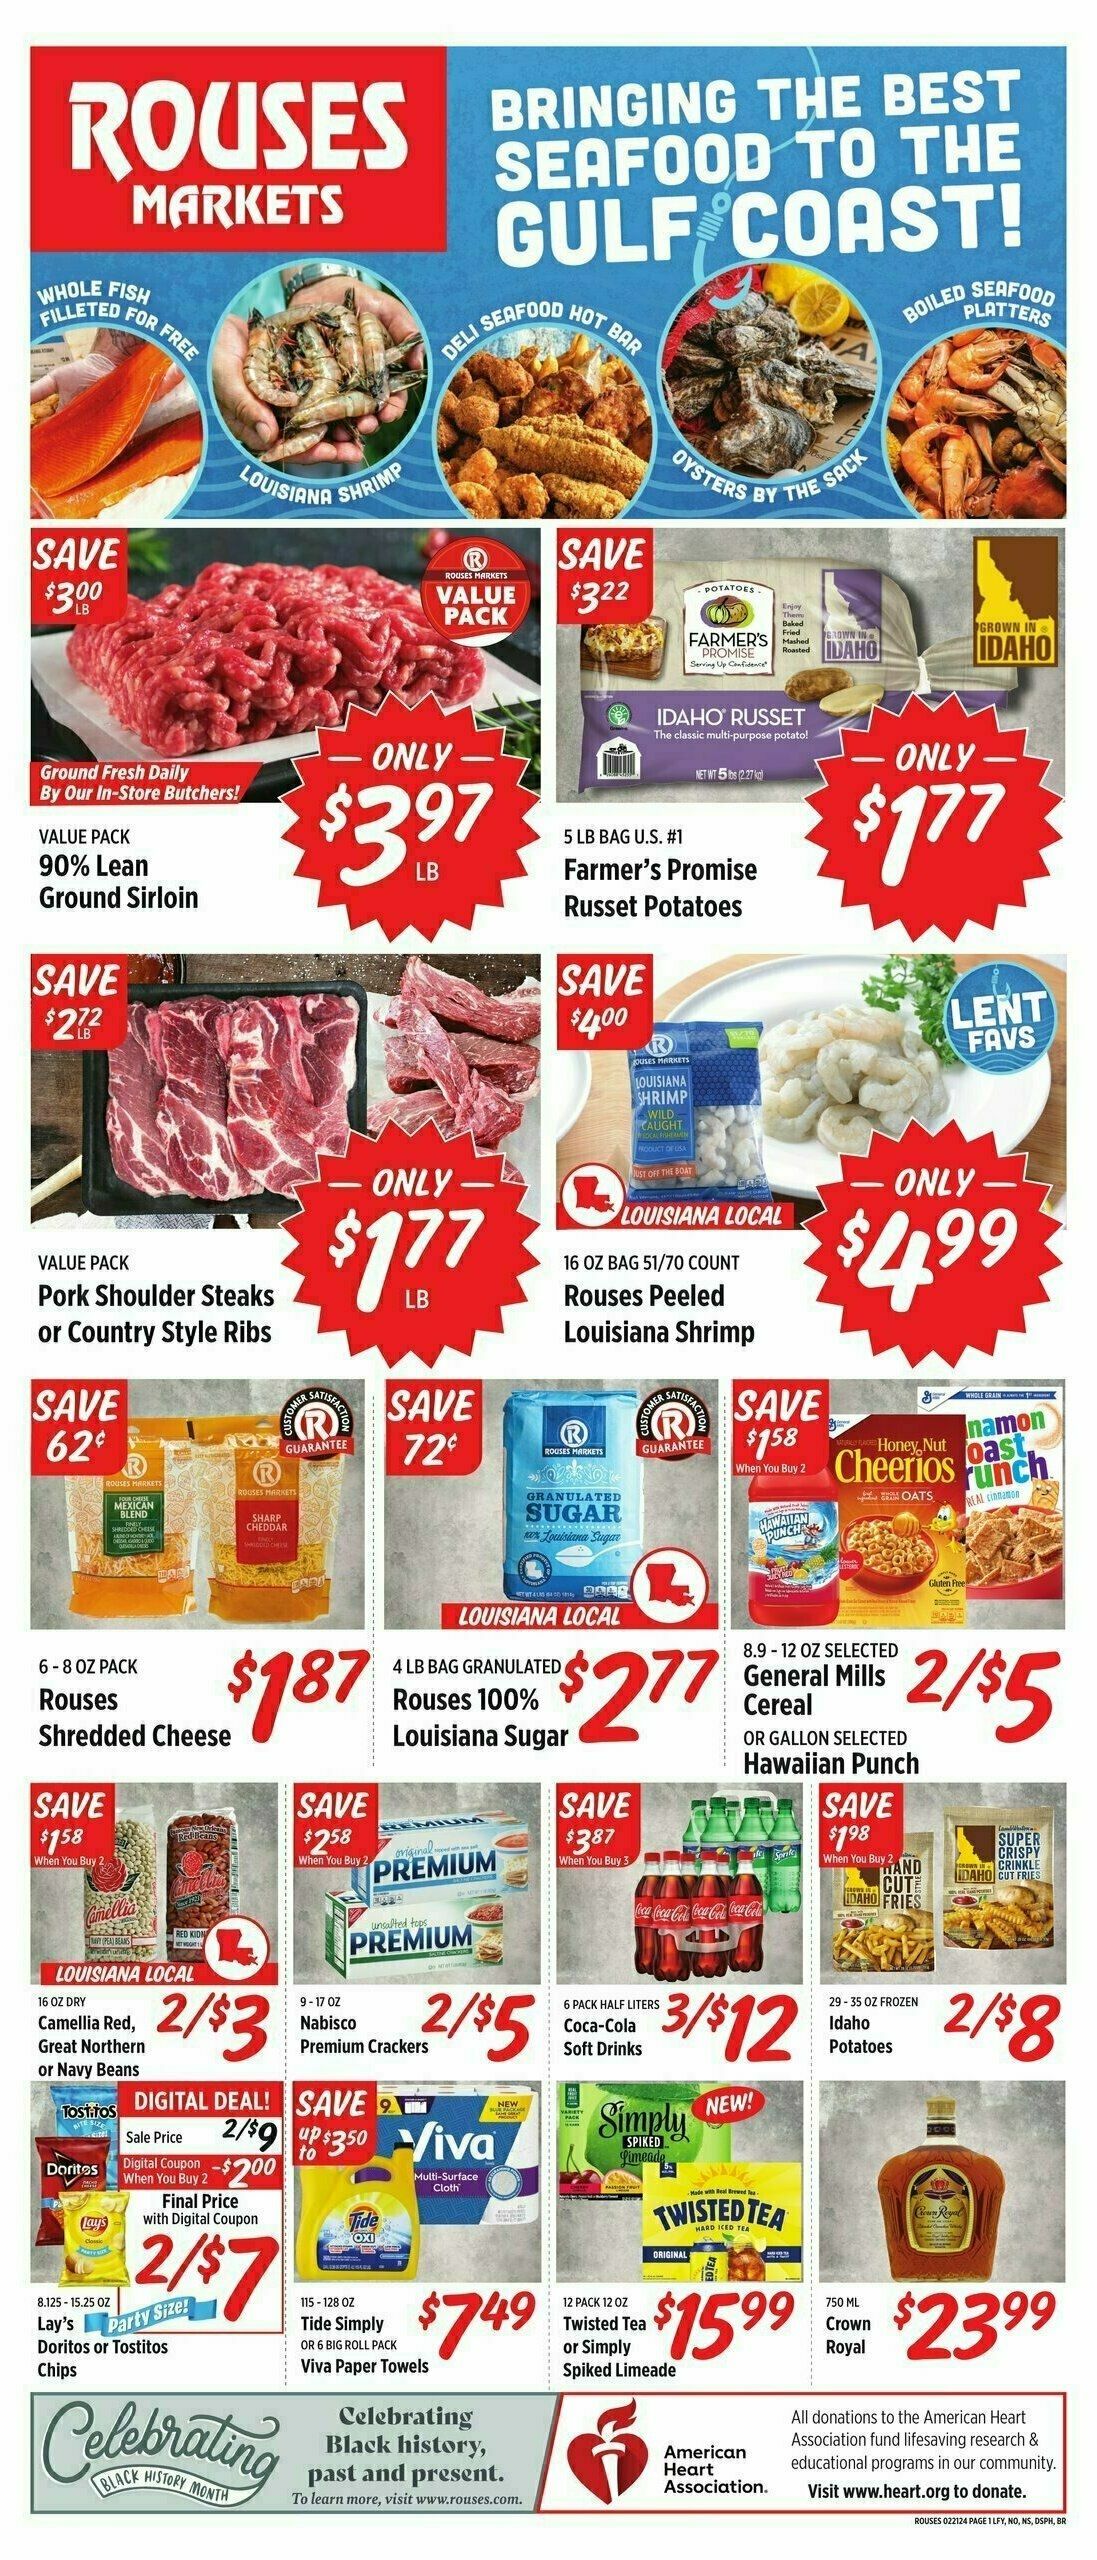 Rouses Markets Weekly Ad from February 21